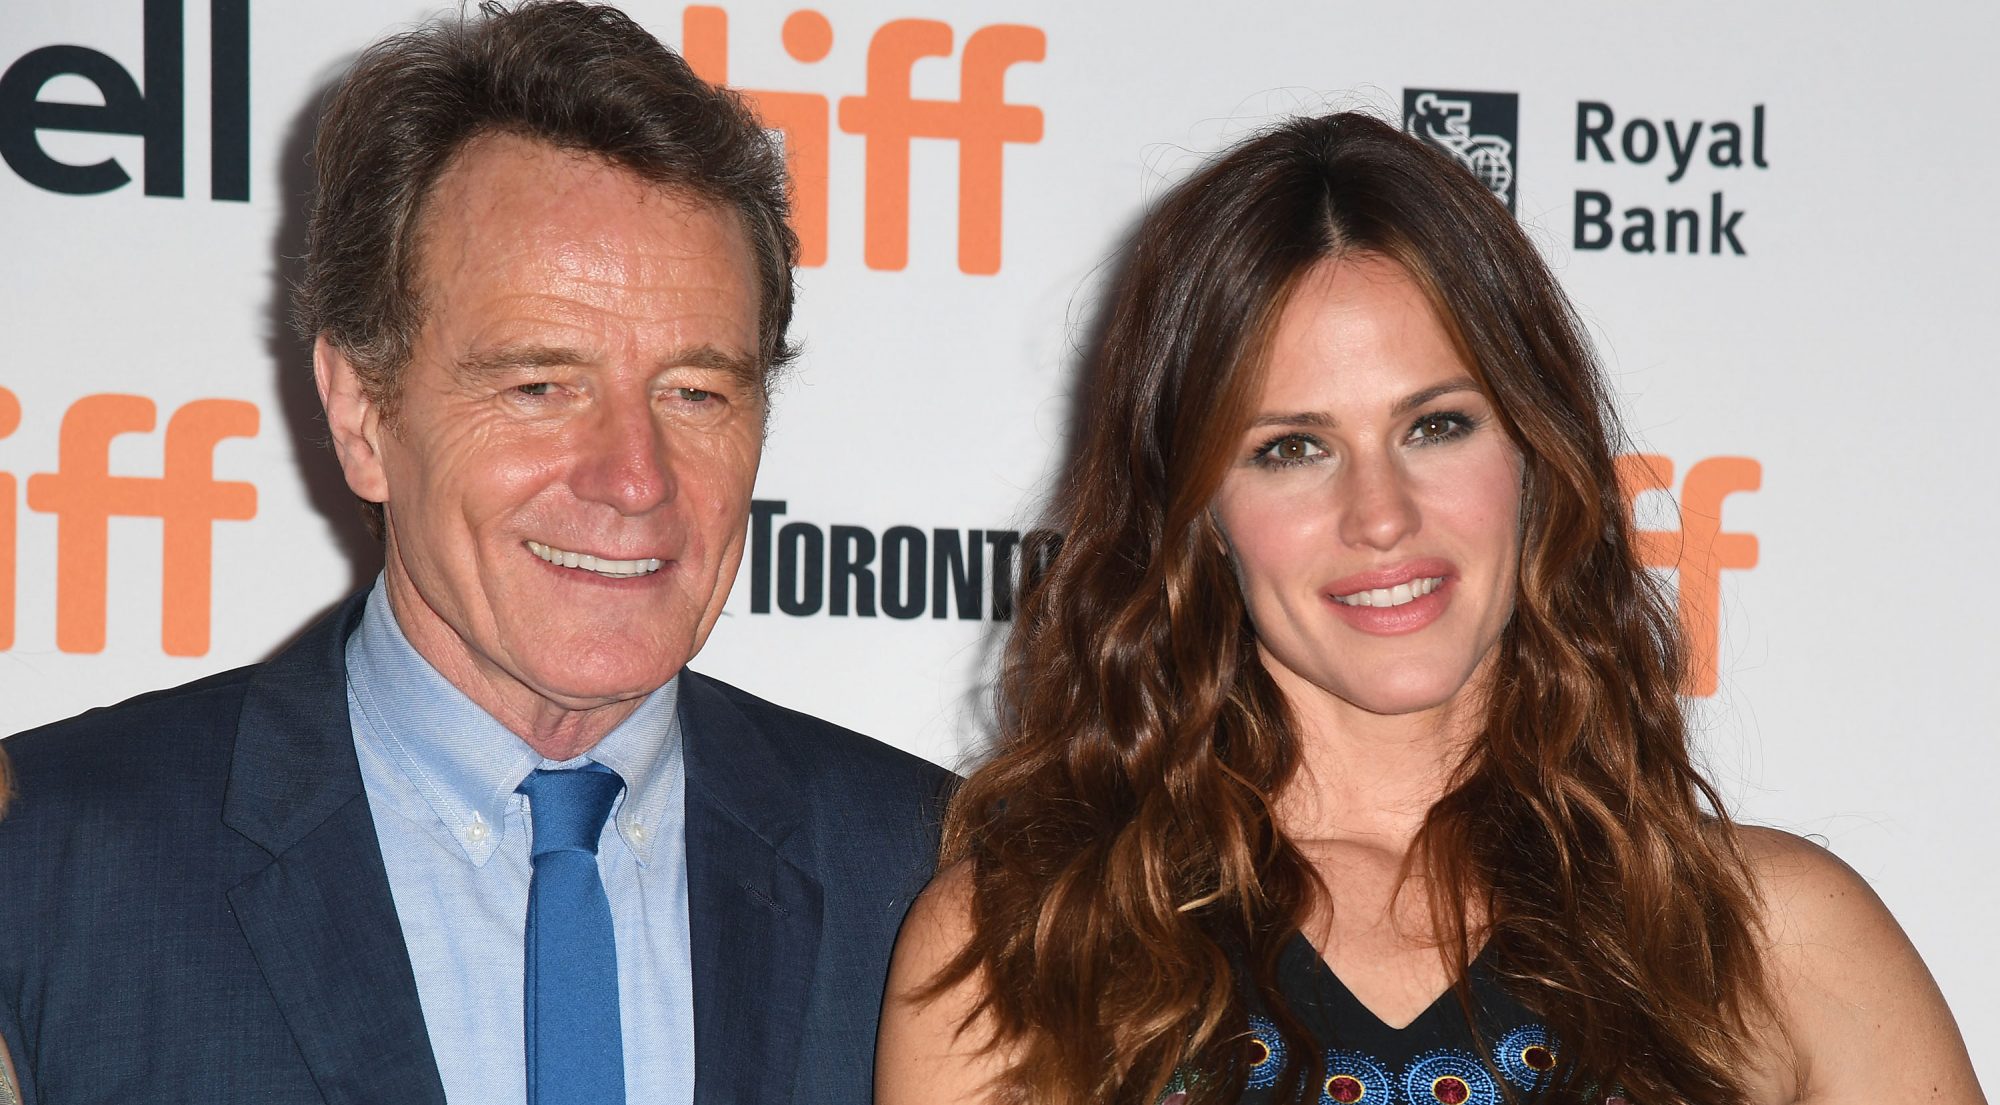 Jennifer Garner and Bryan Cranston did THIS to get intimate for their new movie